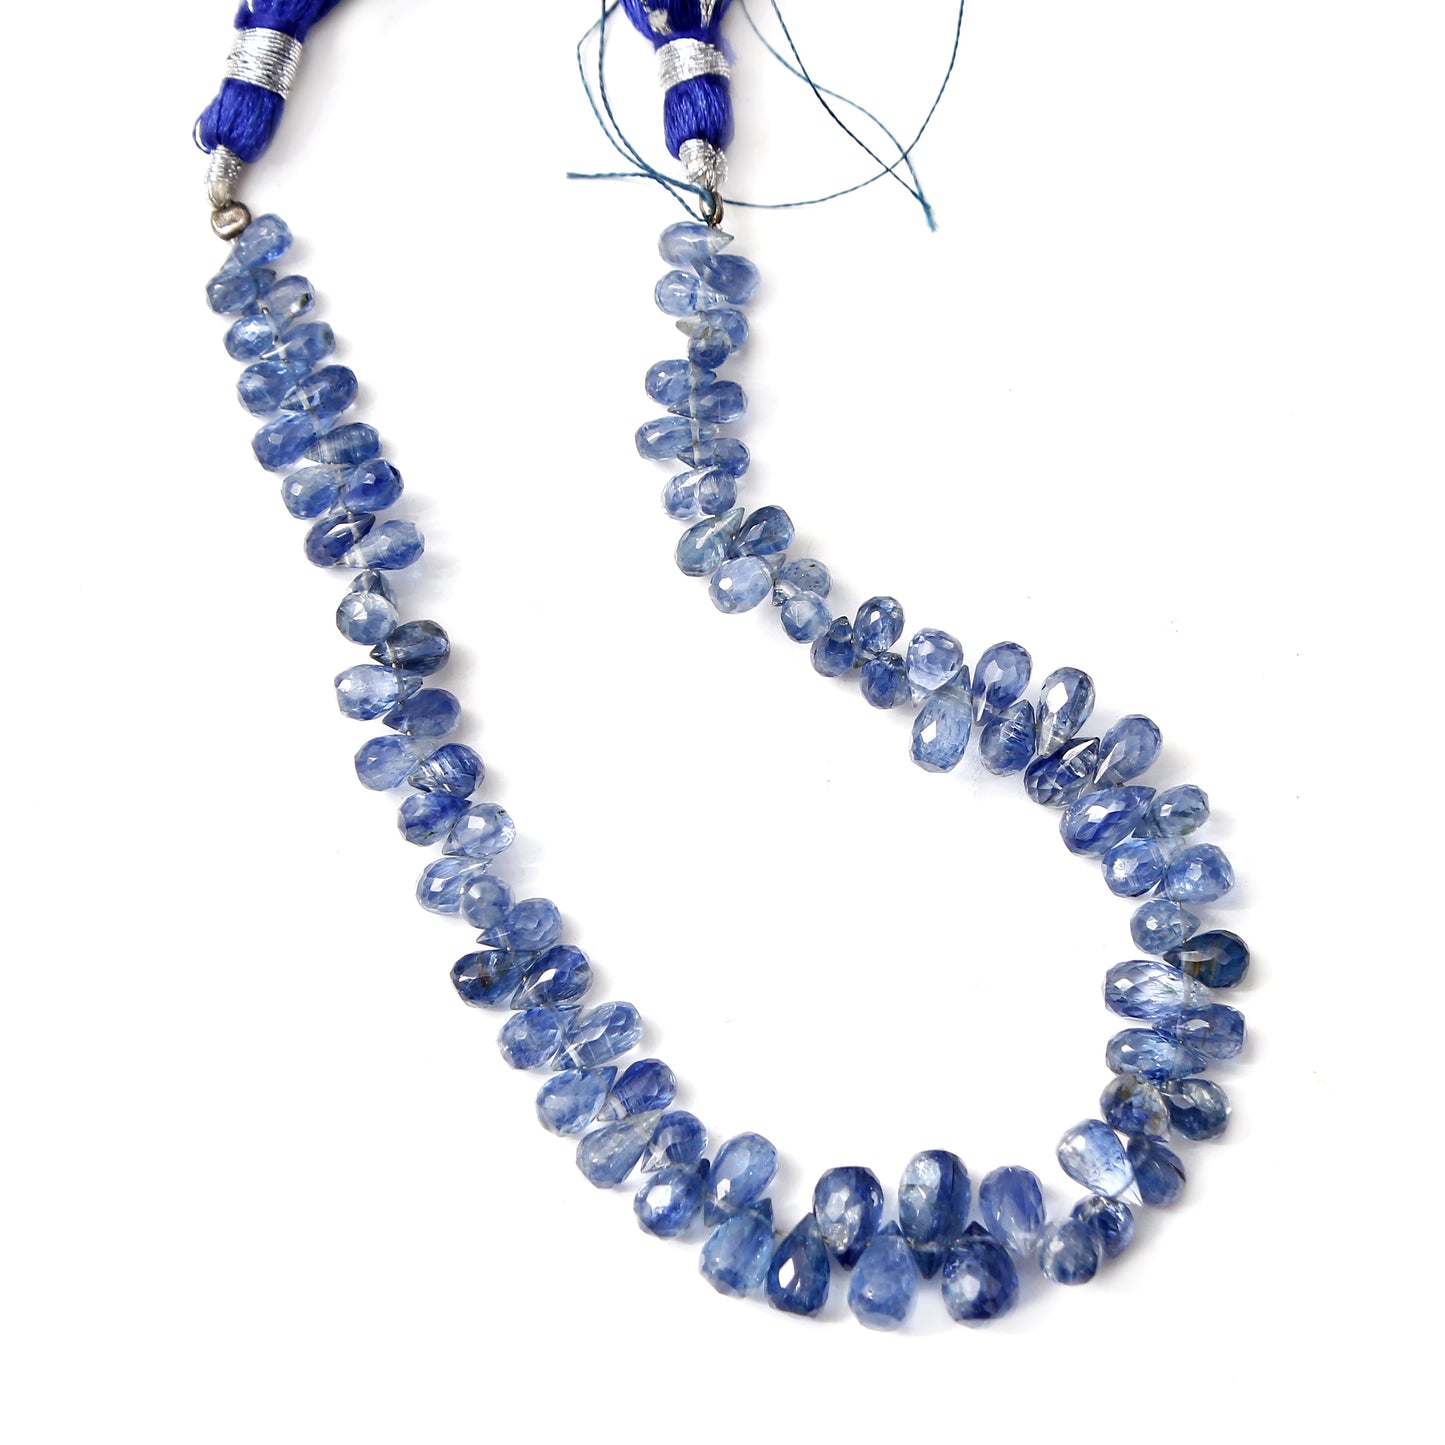 Tanzanite Faceted Drop Briolette Beads: 8 Inches of Stunning Elegance GemsRush